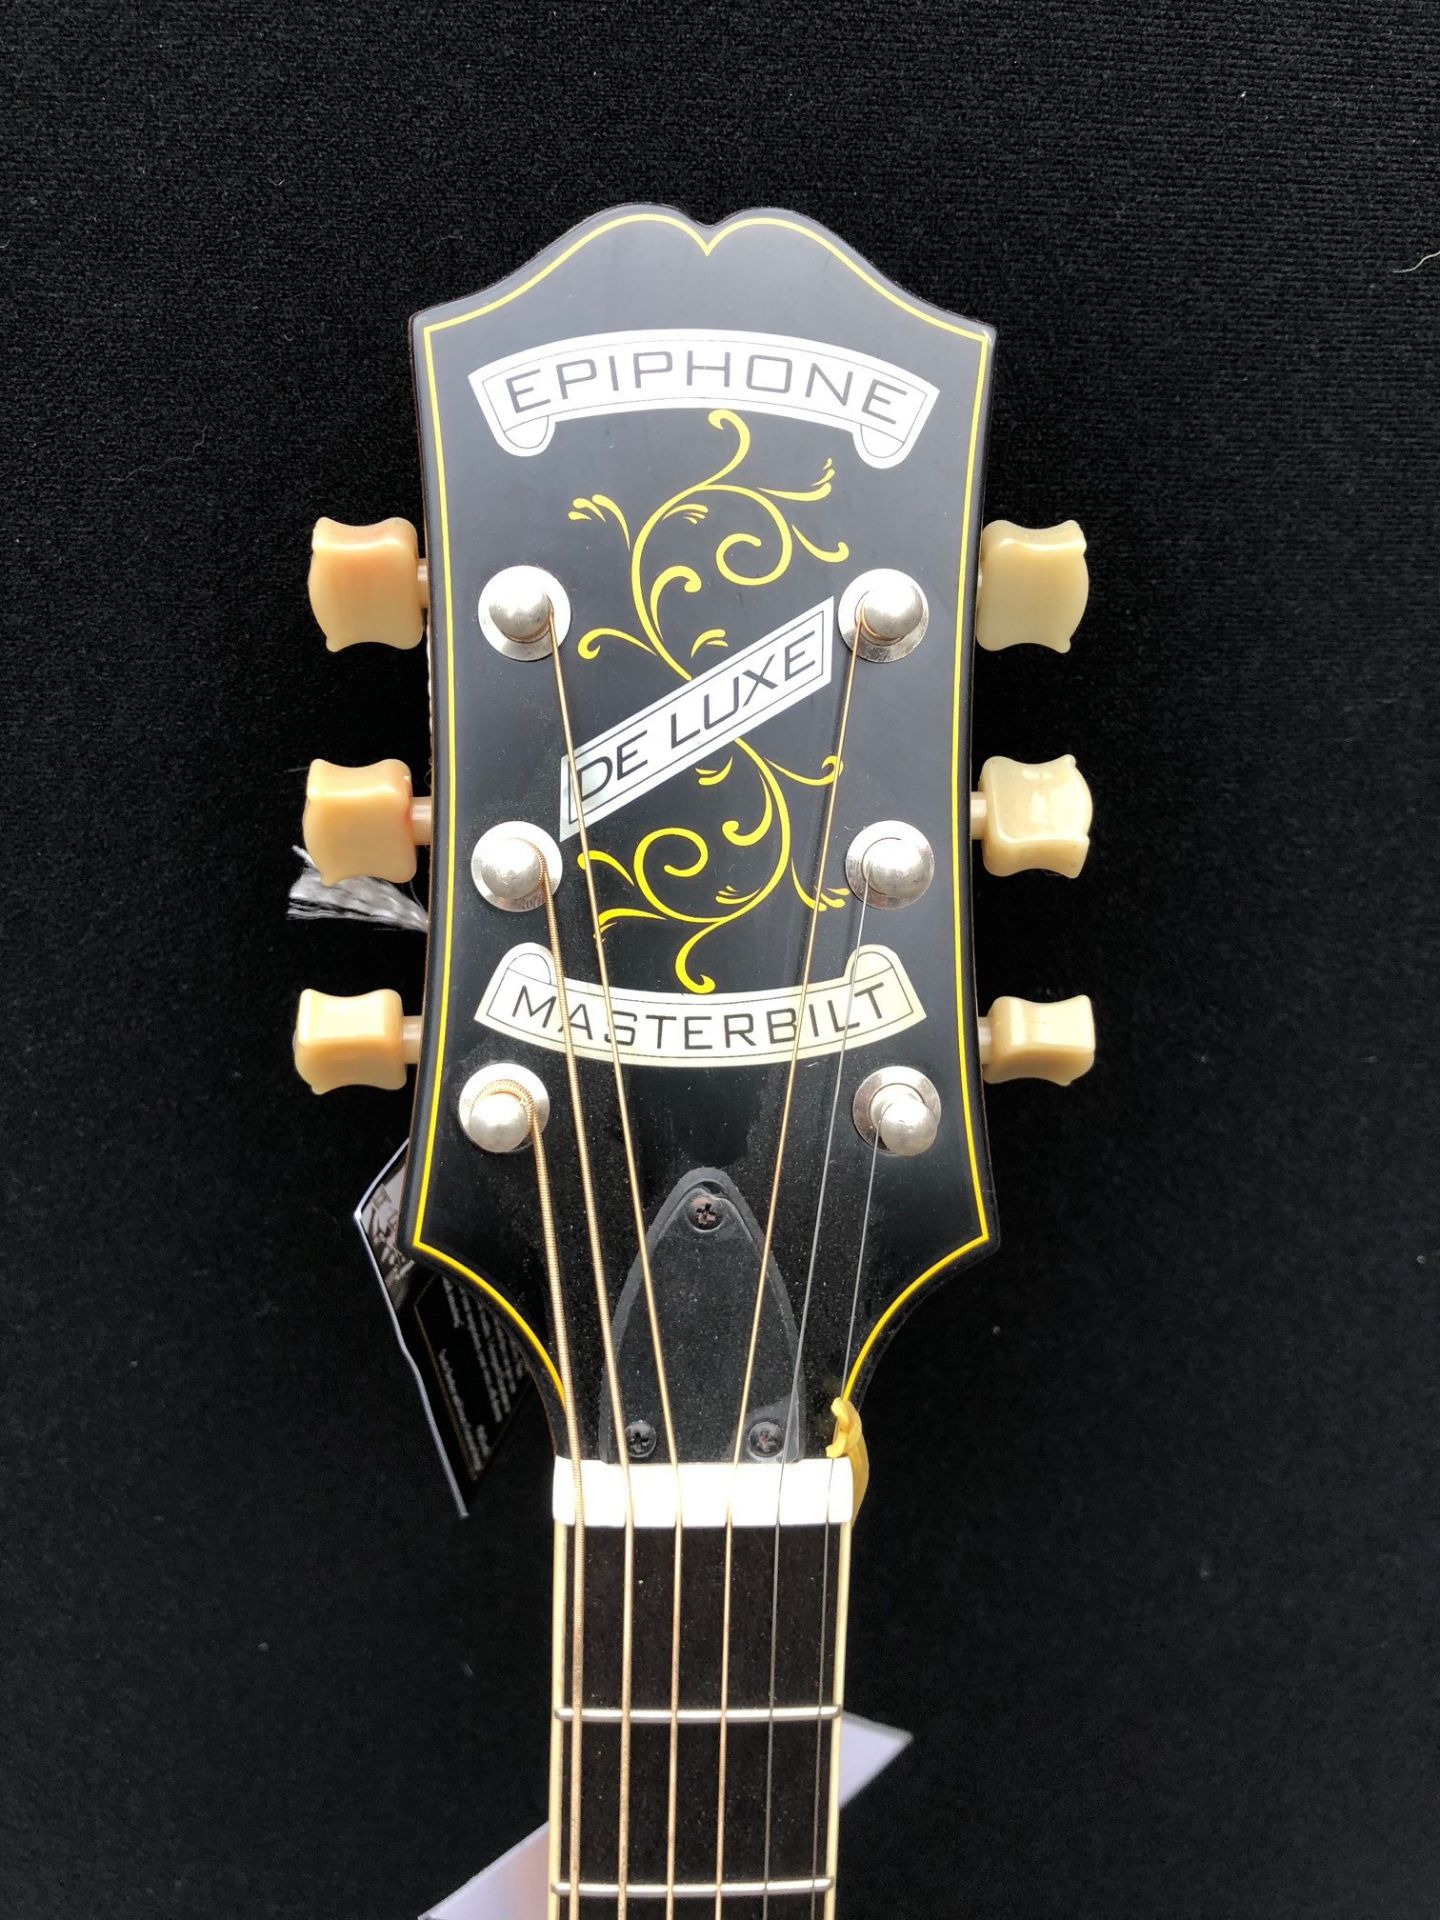 Epiphone Deluxe Round Hole Masterbilt Electro Acoustic Guitar (Brand New Ex Display - RRP £729.00) - Image 2 of 6